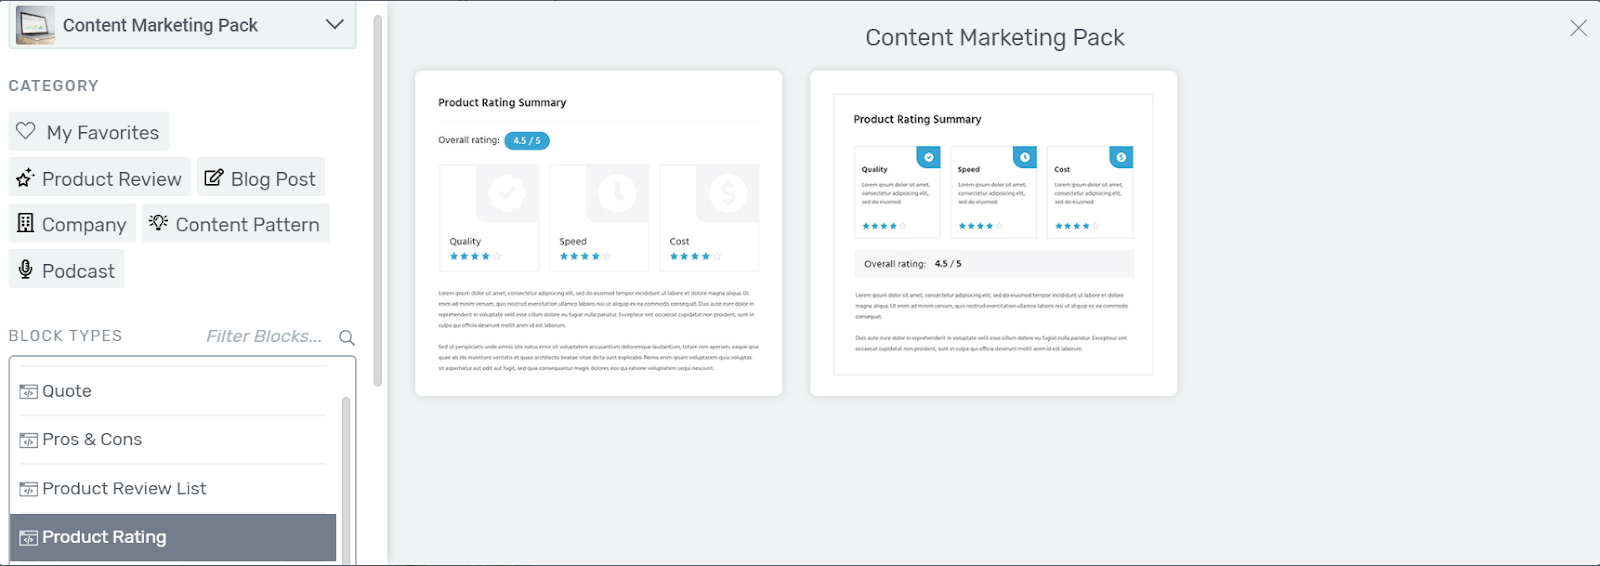 Product Rating Content Blocks